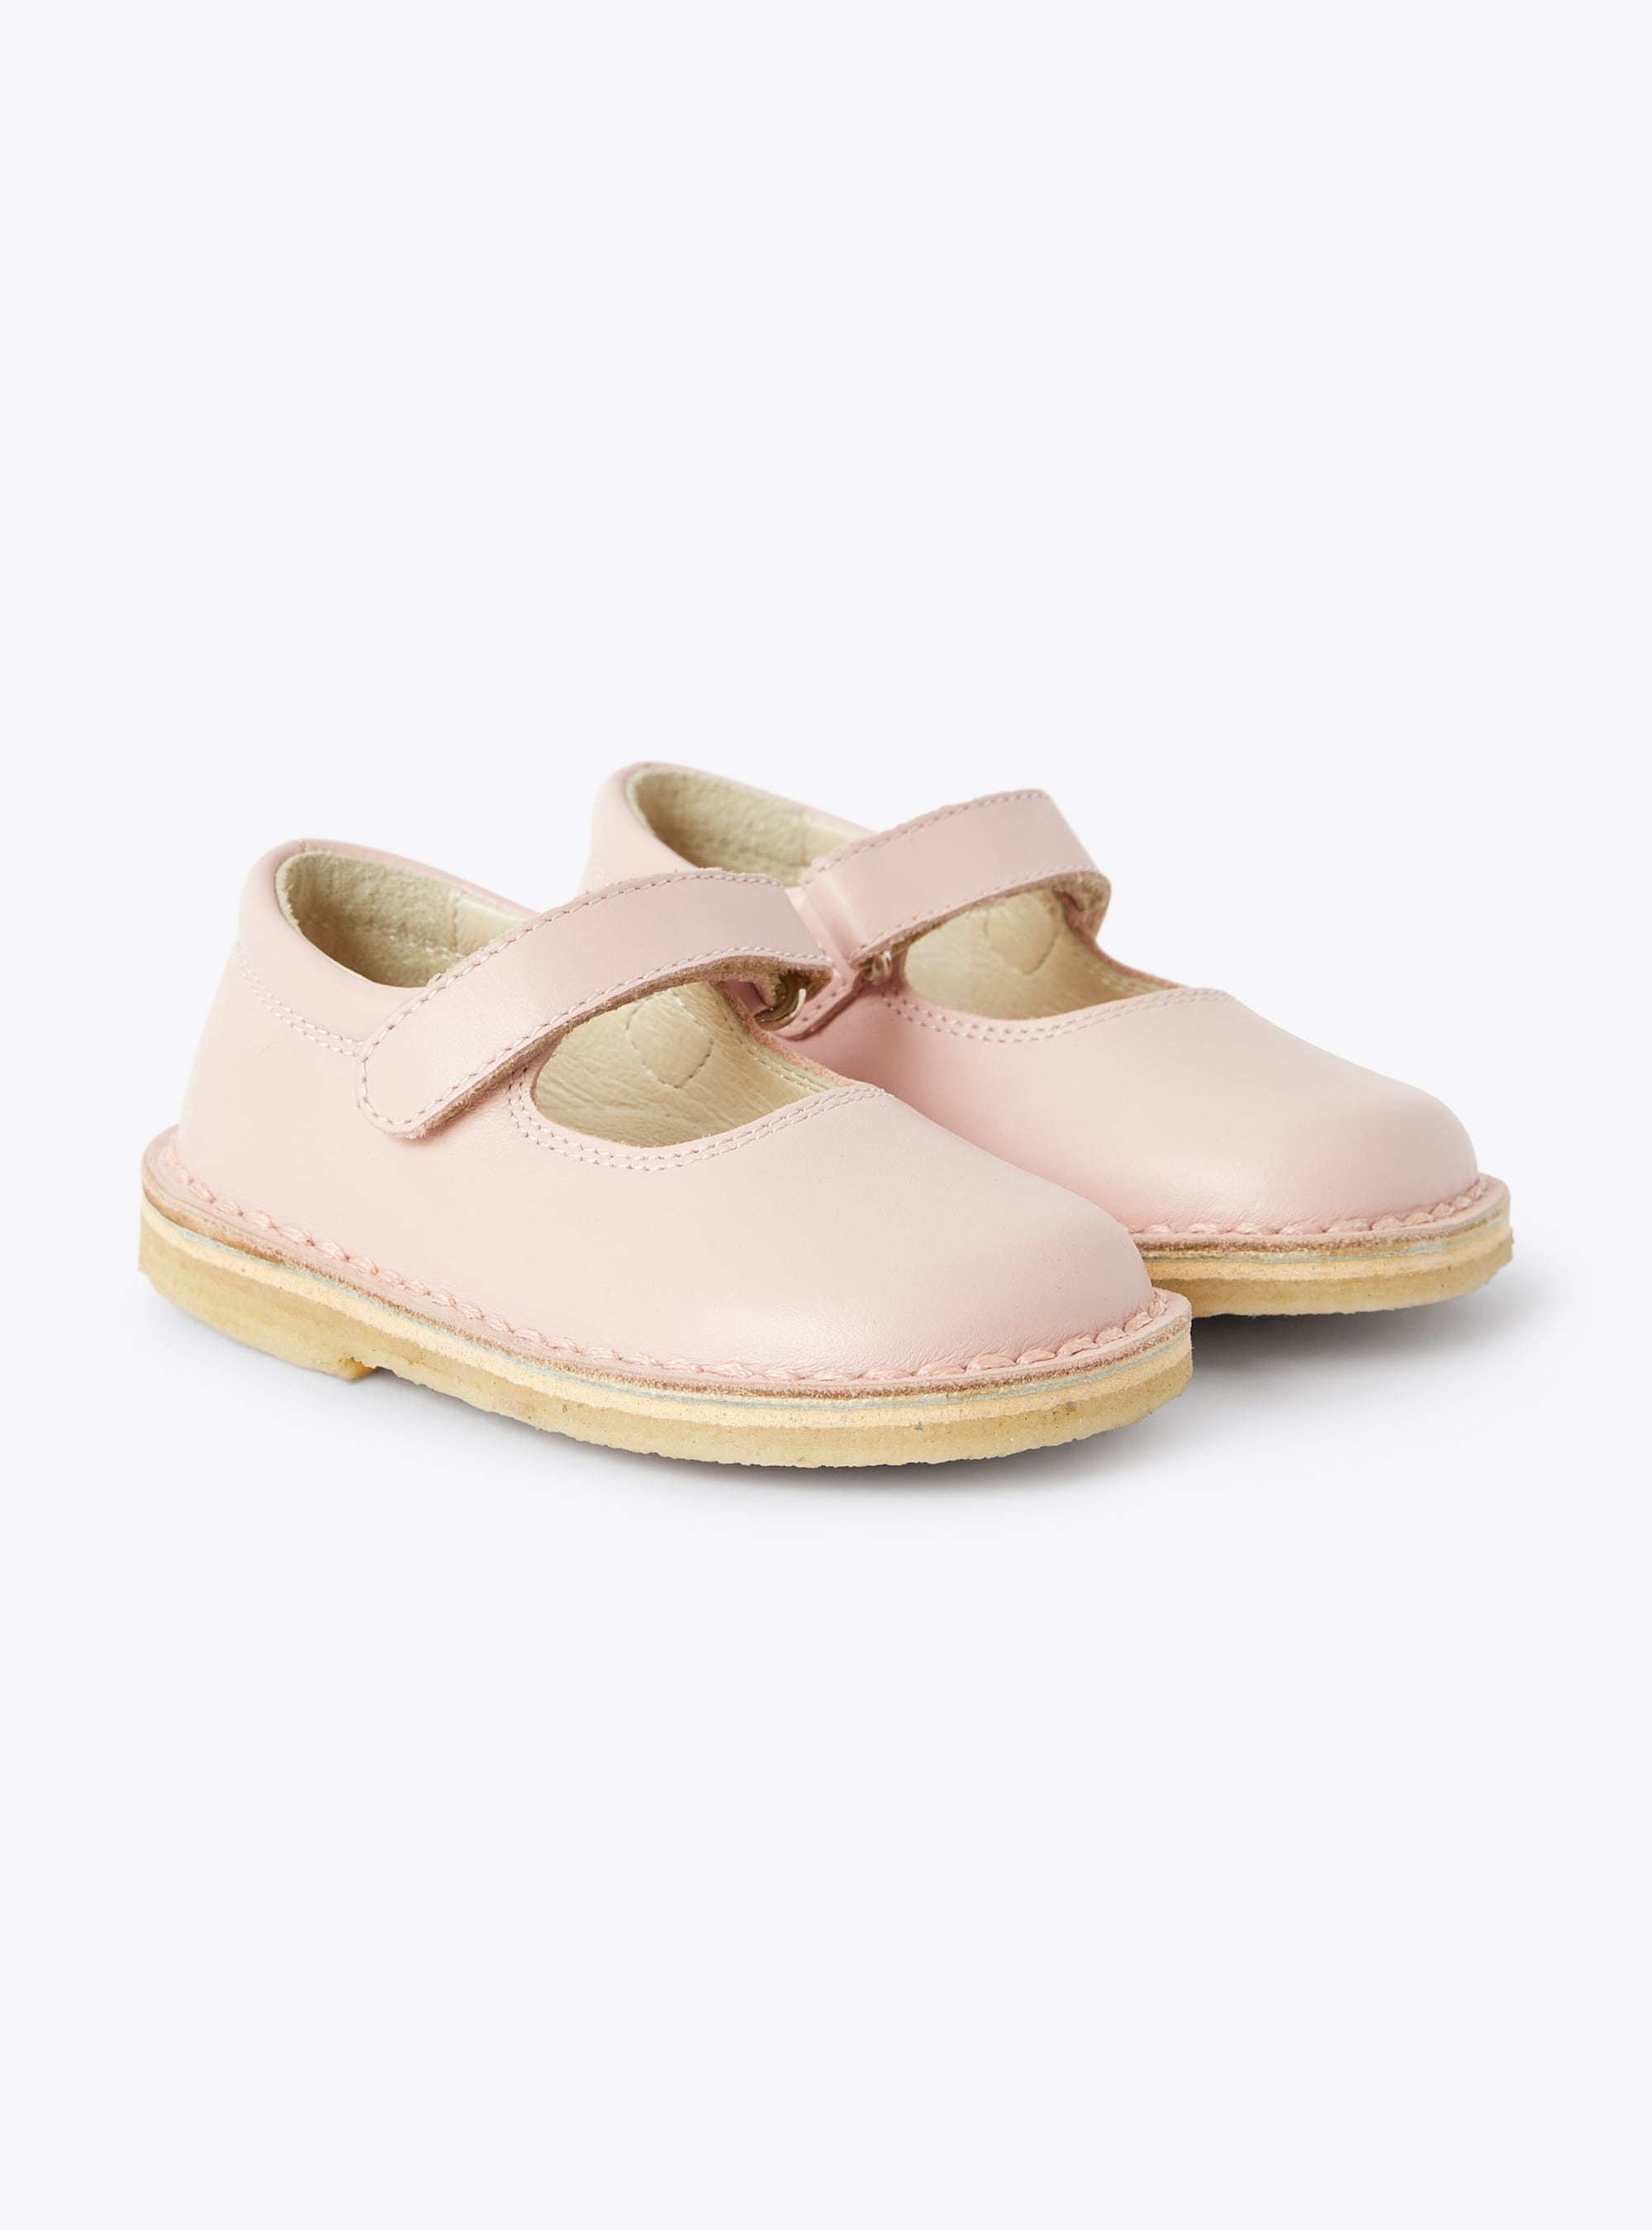 Ballet flat for babies in pink leather - Shoes - Il Gufo